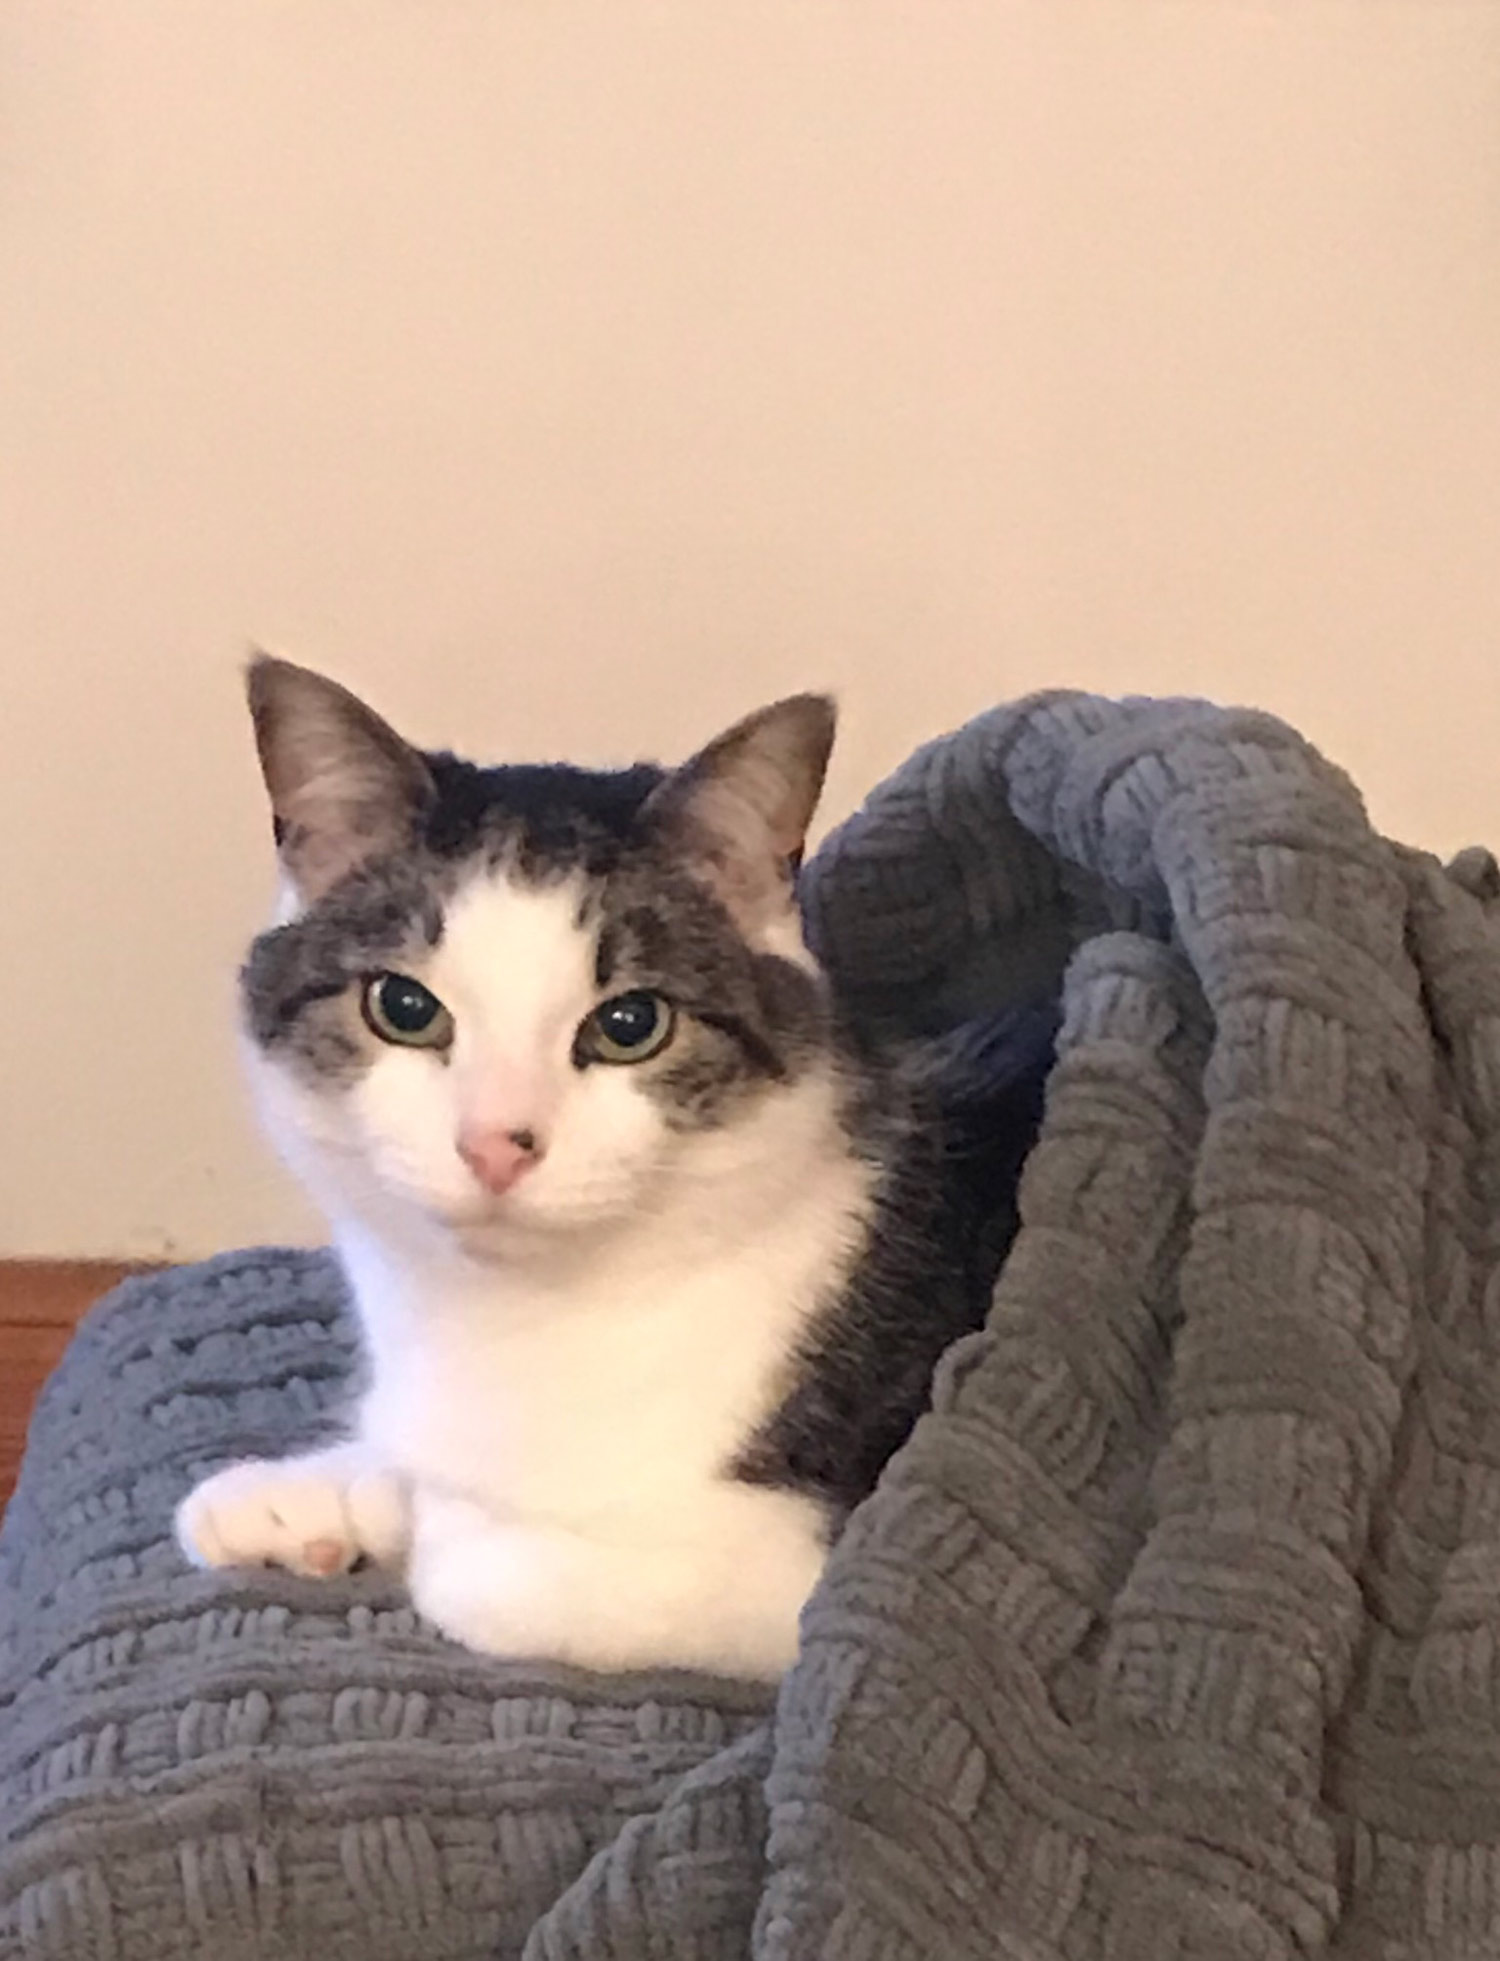 Fran B. in Manchester, NH sent a picture of Noah, her seven-year-old grey and white cat. Fran says he loves to snuggle and is shown snuggled into one of those new pita pocket style beds.